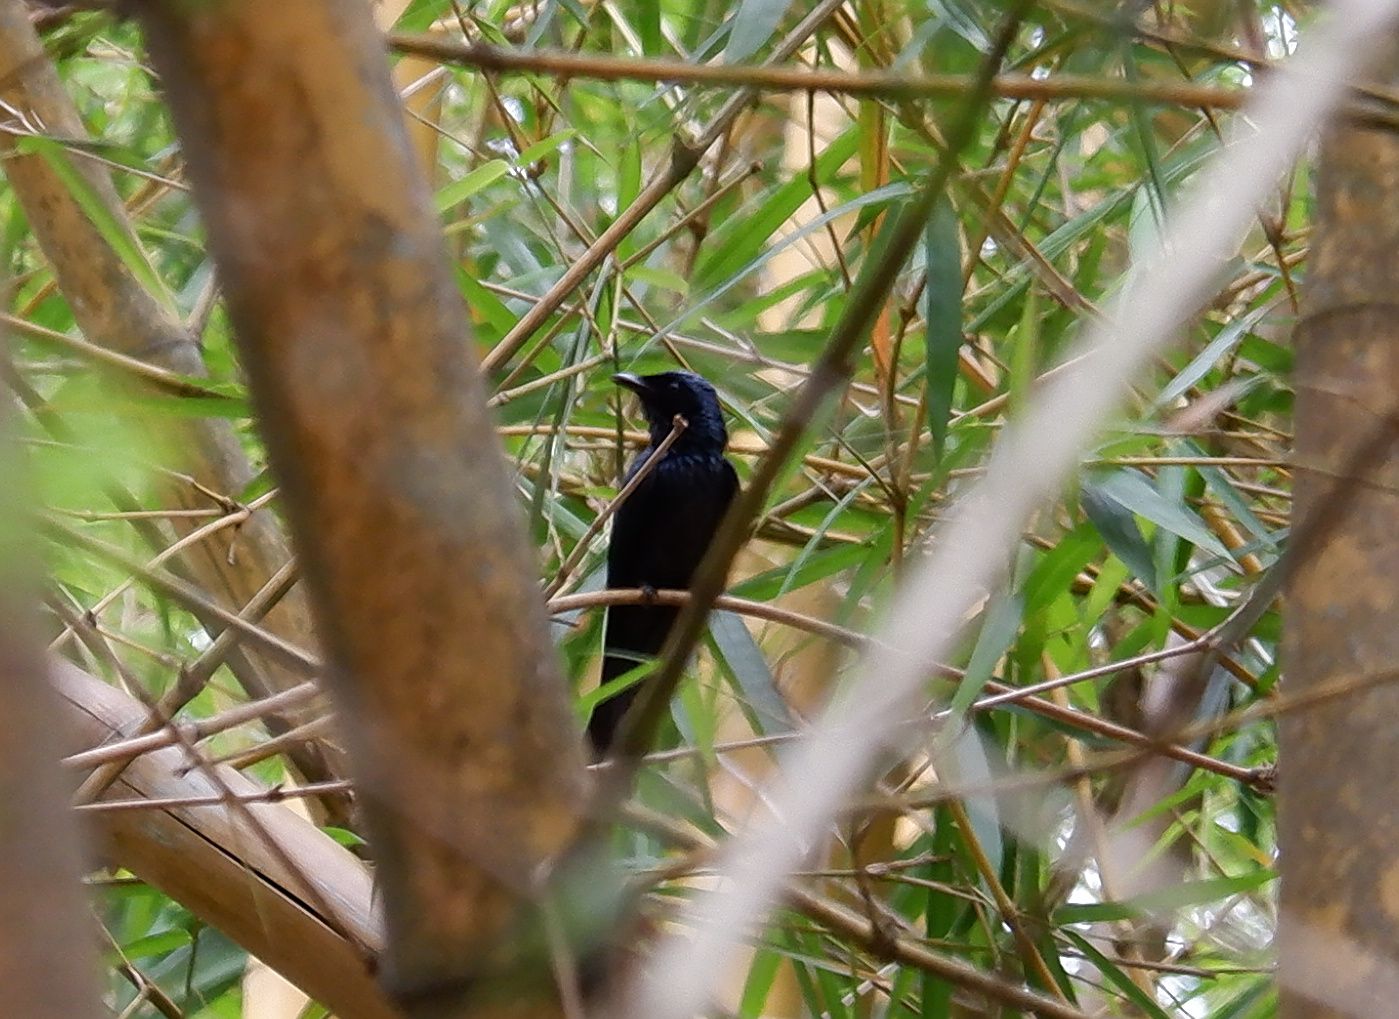 Most likely black drongo